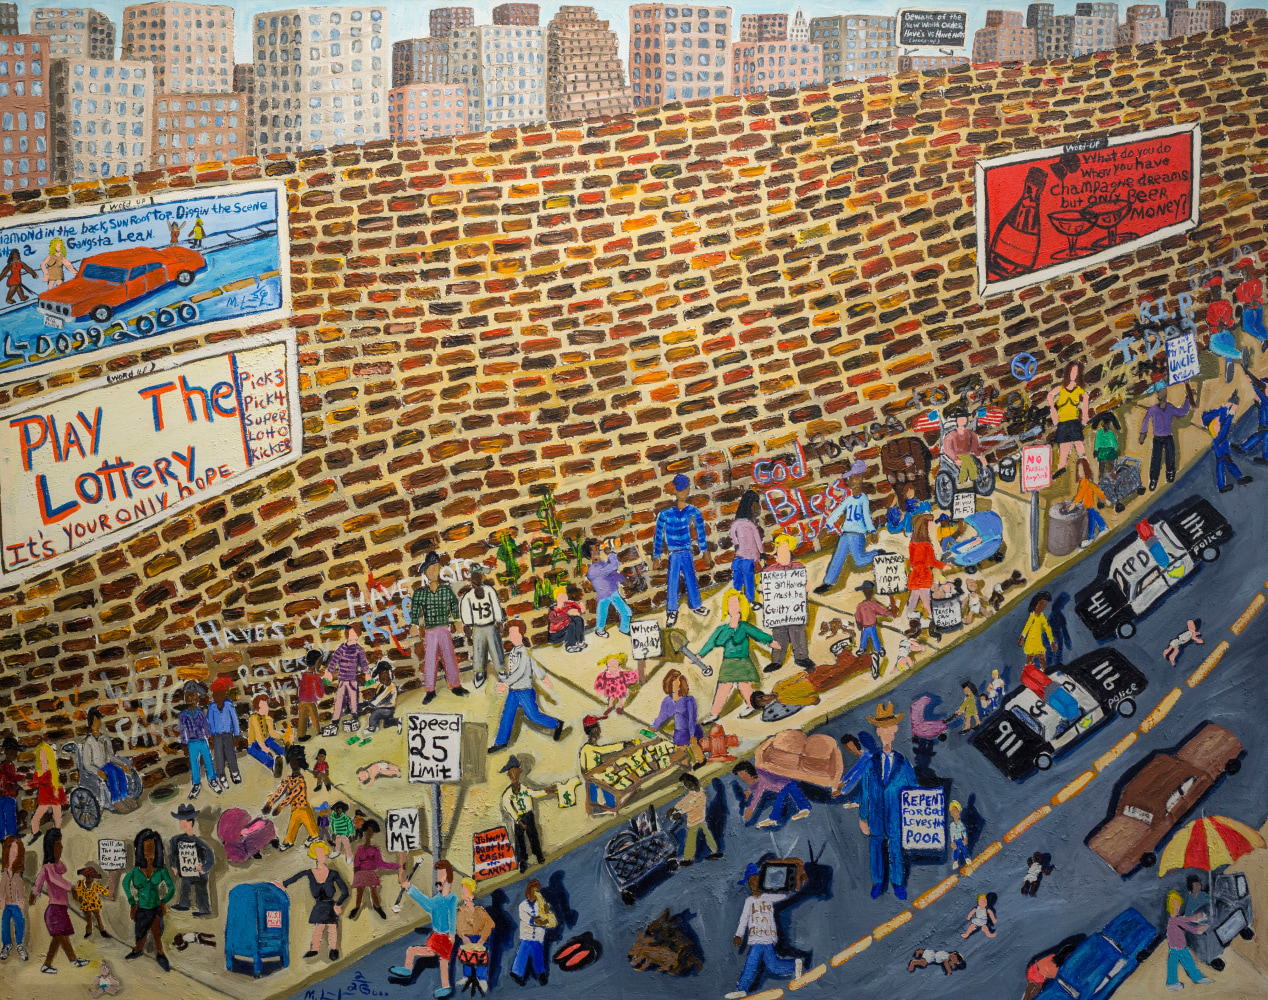 The Great Wall of Poverty, 2000
Acrylic on Textured Canvas
68&amp;nbsp;x 87.5 inches